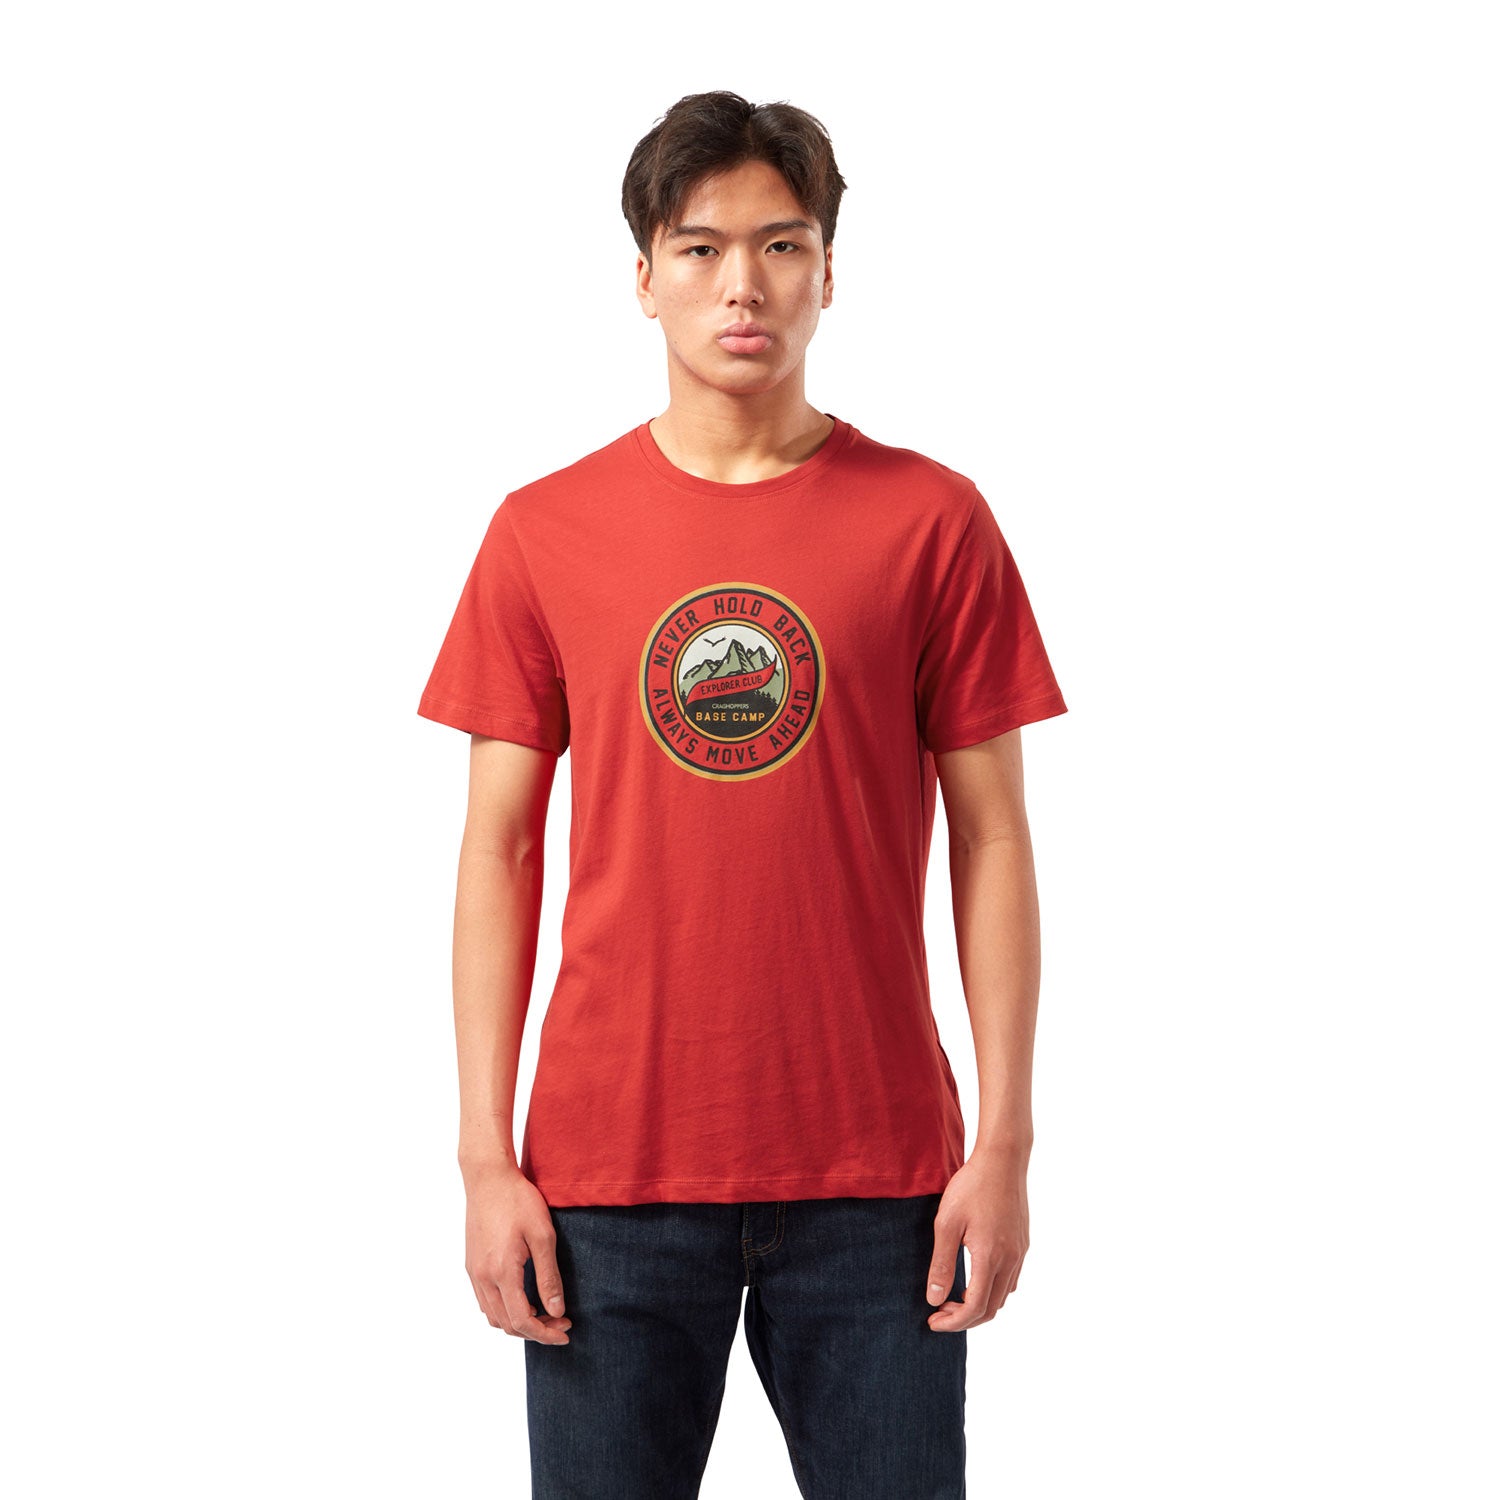 Pompeian Red Craghoppers Mightie T-shirt